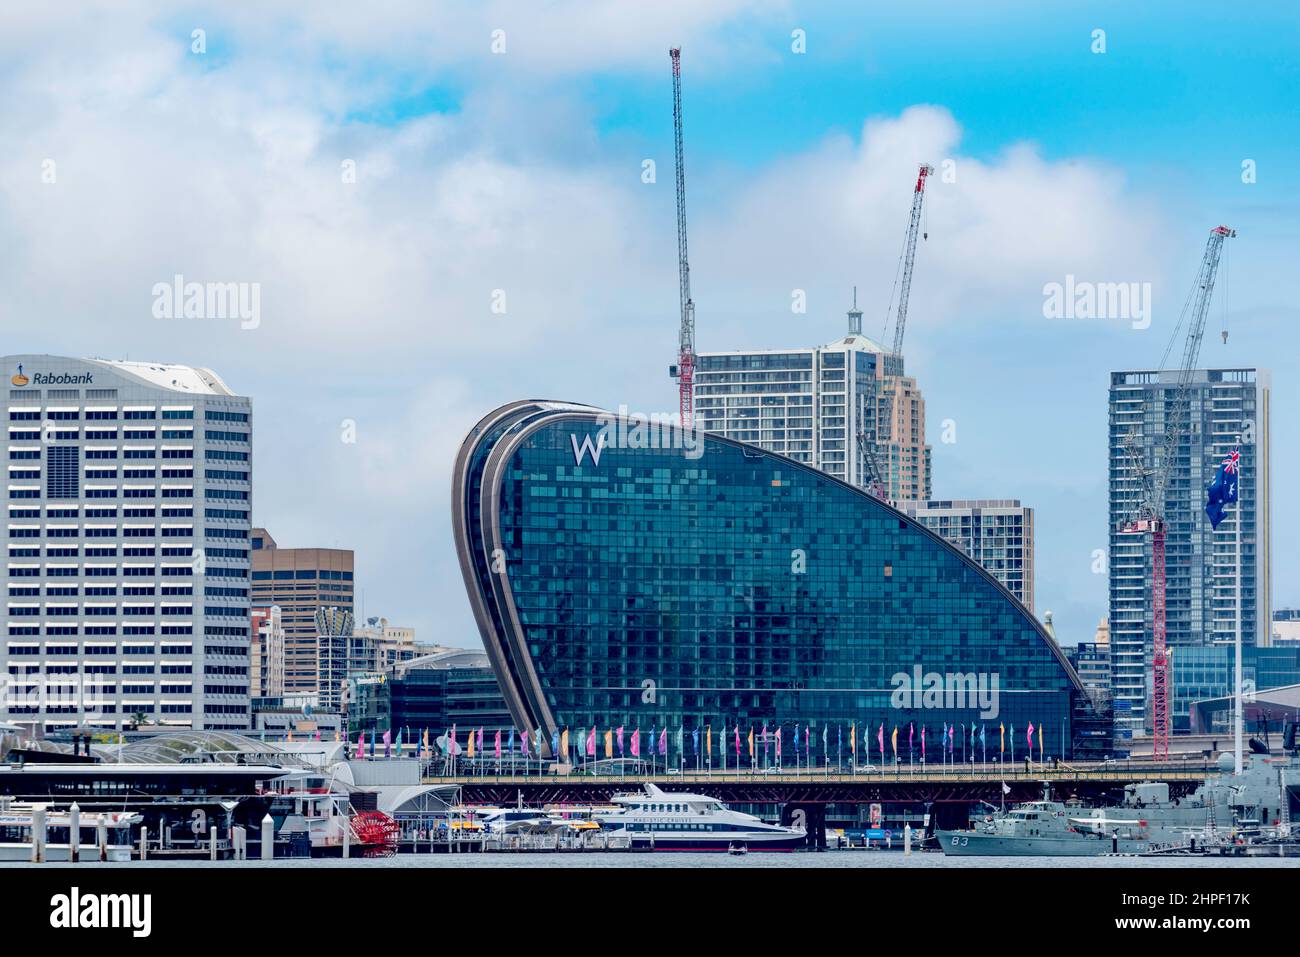 Feb 2022 Syd. Aust: The new W Hotel due to open in The Ribbon building Darling Harbour in 2022 may be further delayed after its second builder default Stock Photo